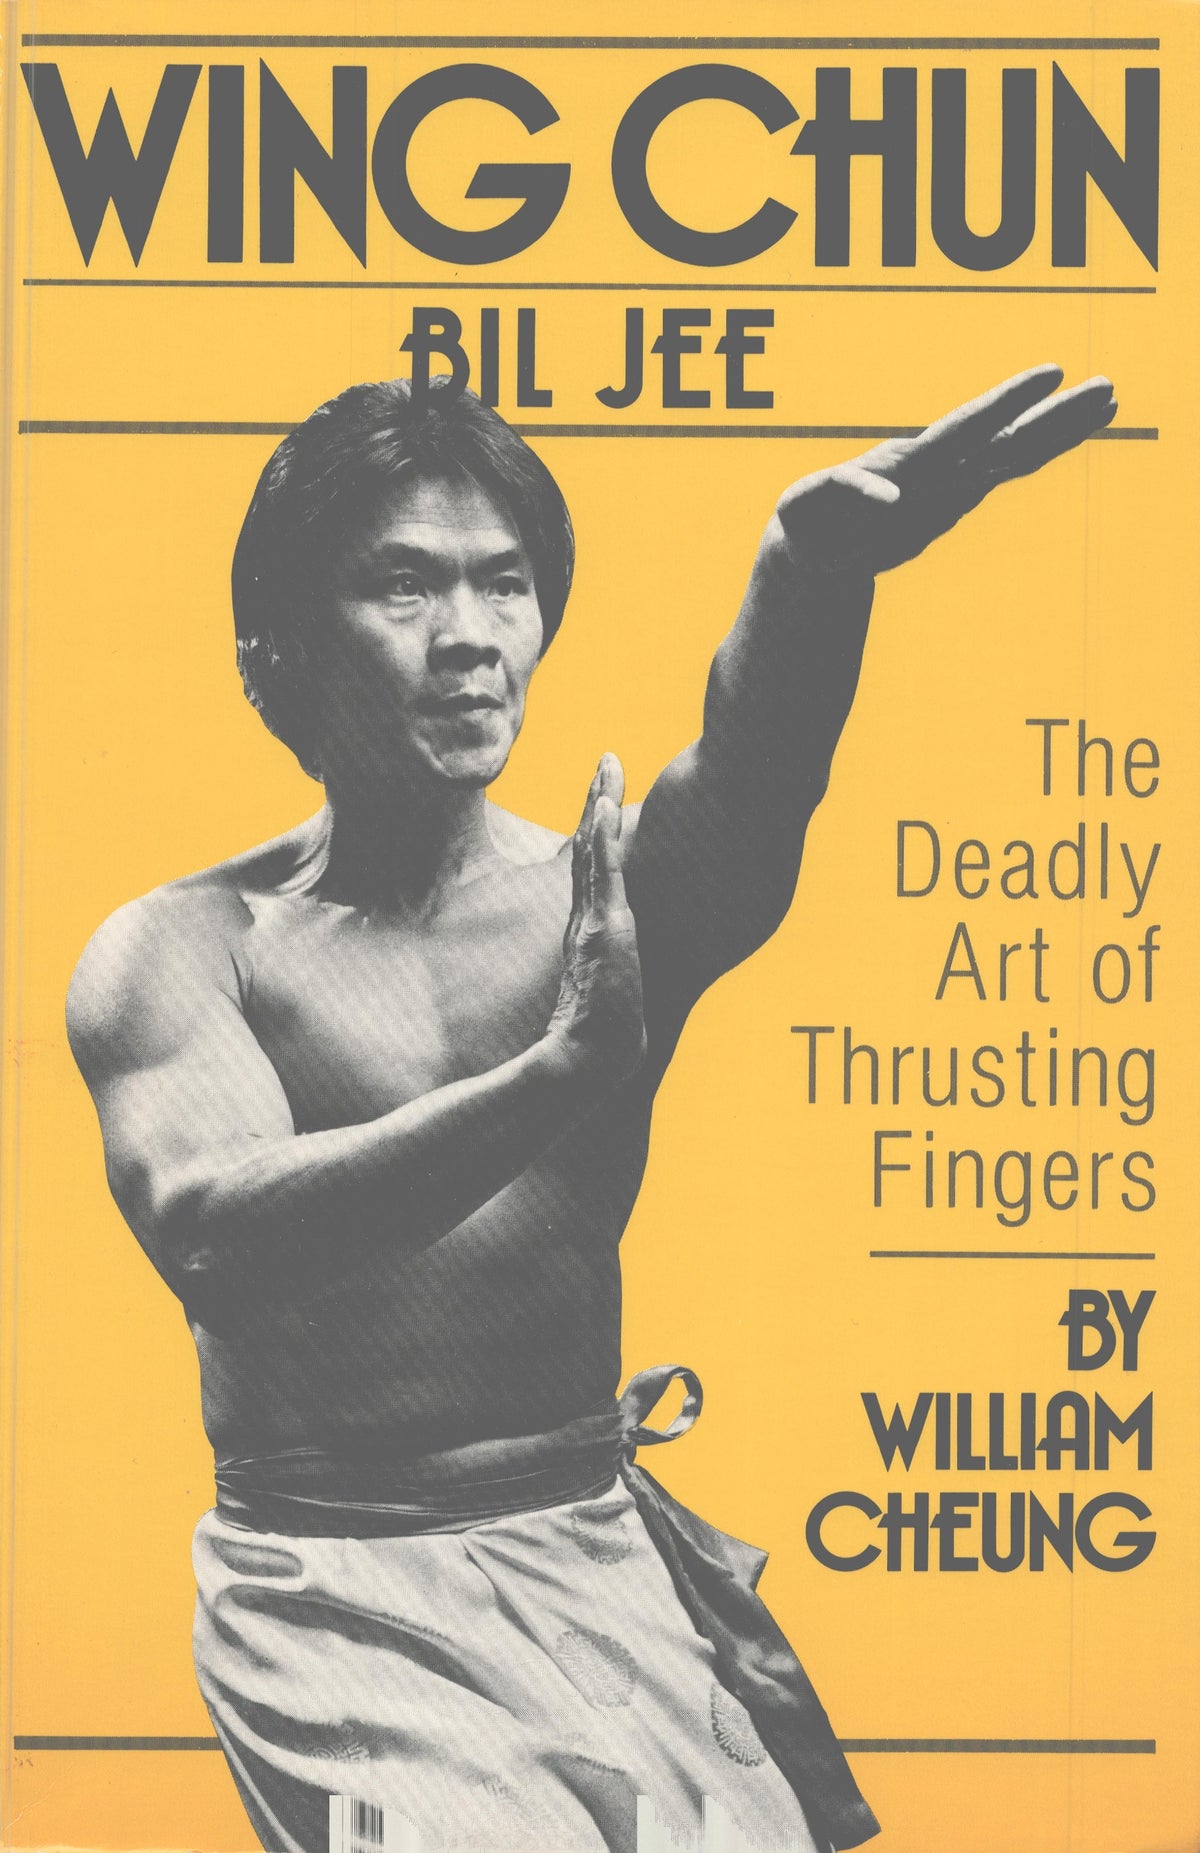 Wing Chun Bil Jee Thrusting Fingers book by William Cheung